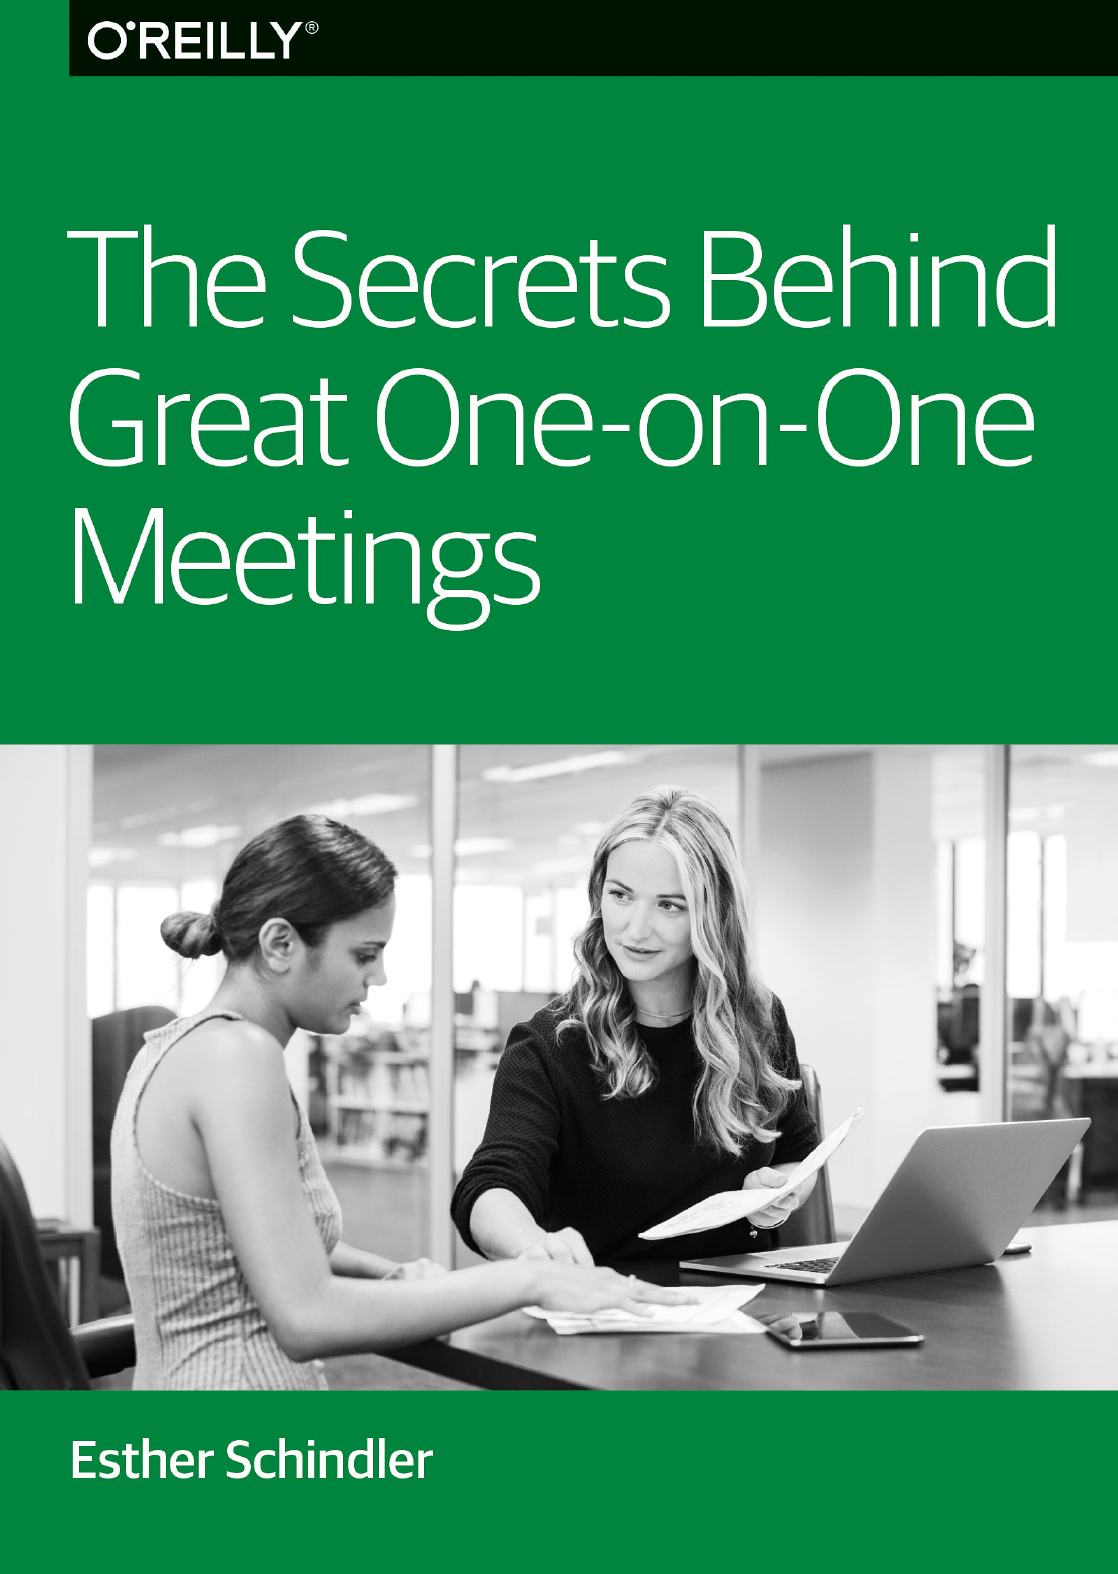 Cover Image for EBook - includes title: The Secrets Behind Great One-on-One Meetings. Author:Esther Schindler. Includes black and white image of two women in an office having a conversation